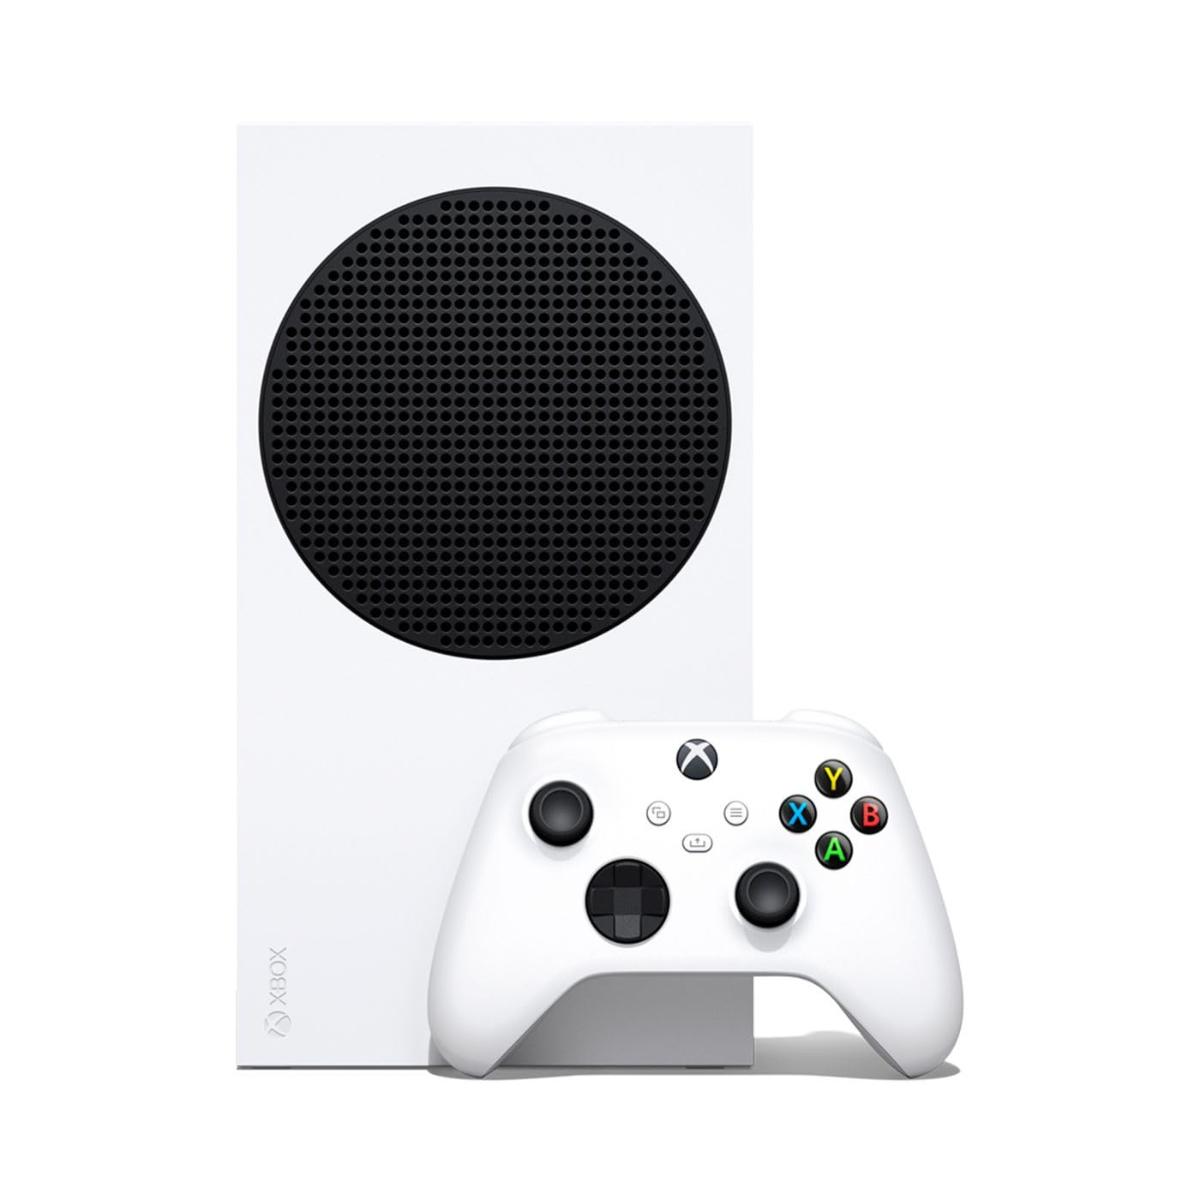 The Xbox Series S 512GB All-Digital Gaming Console, against a white background